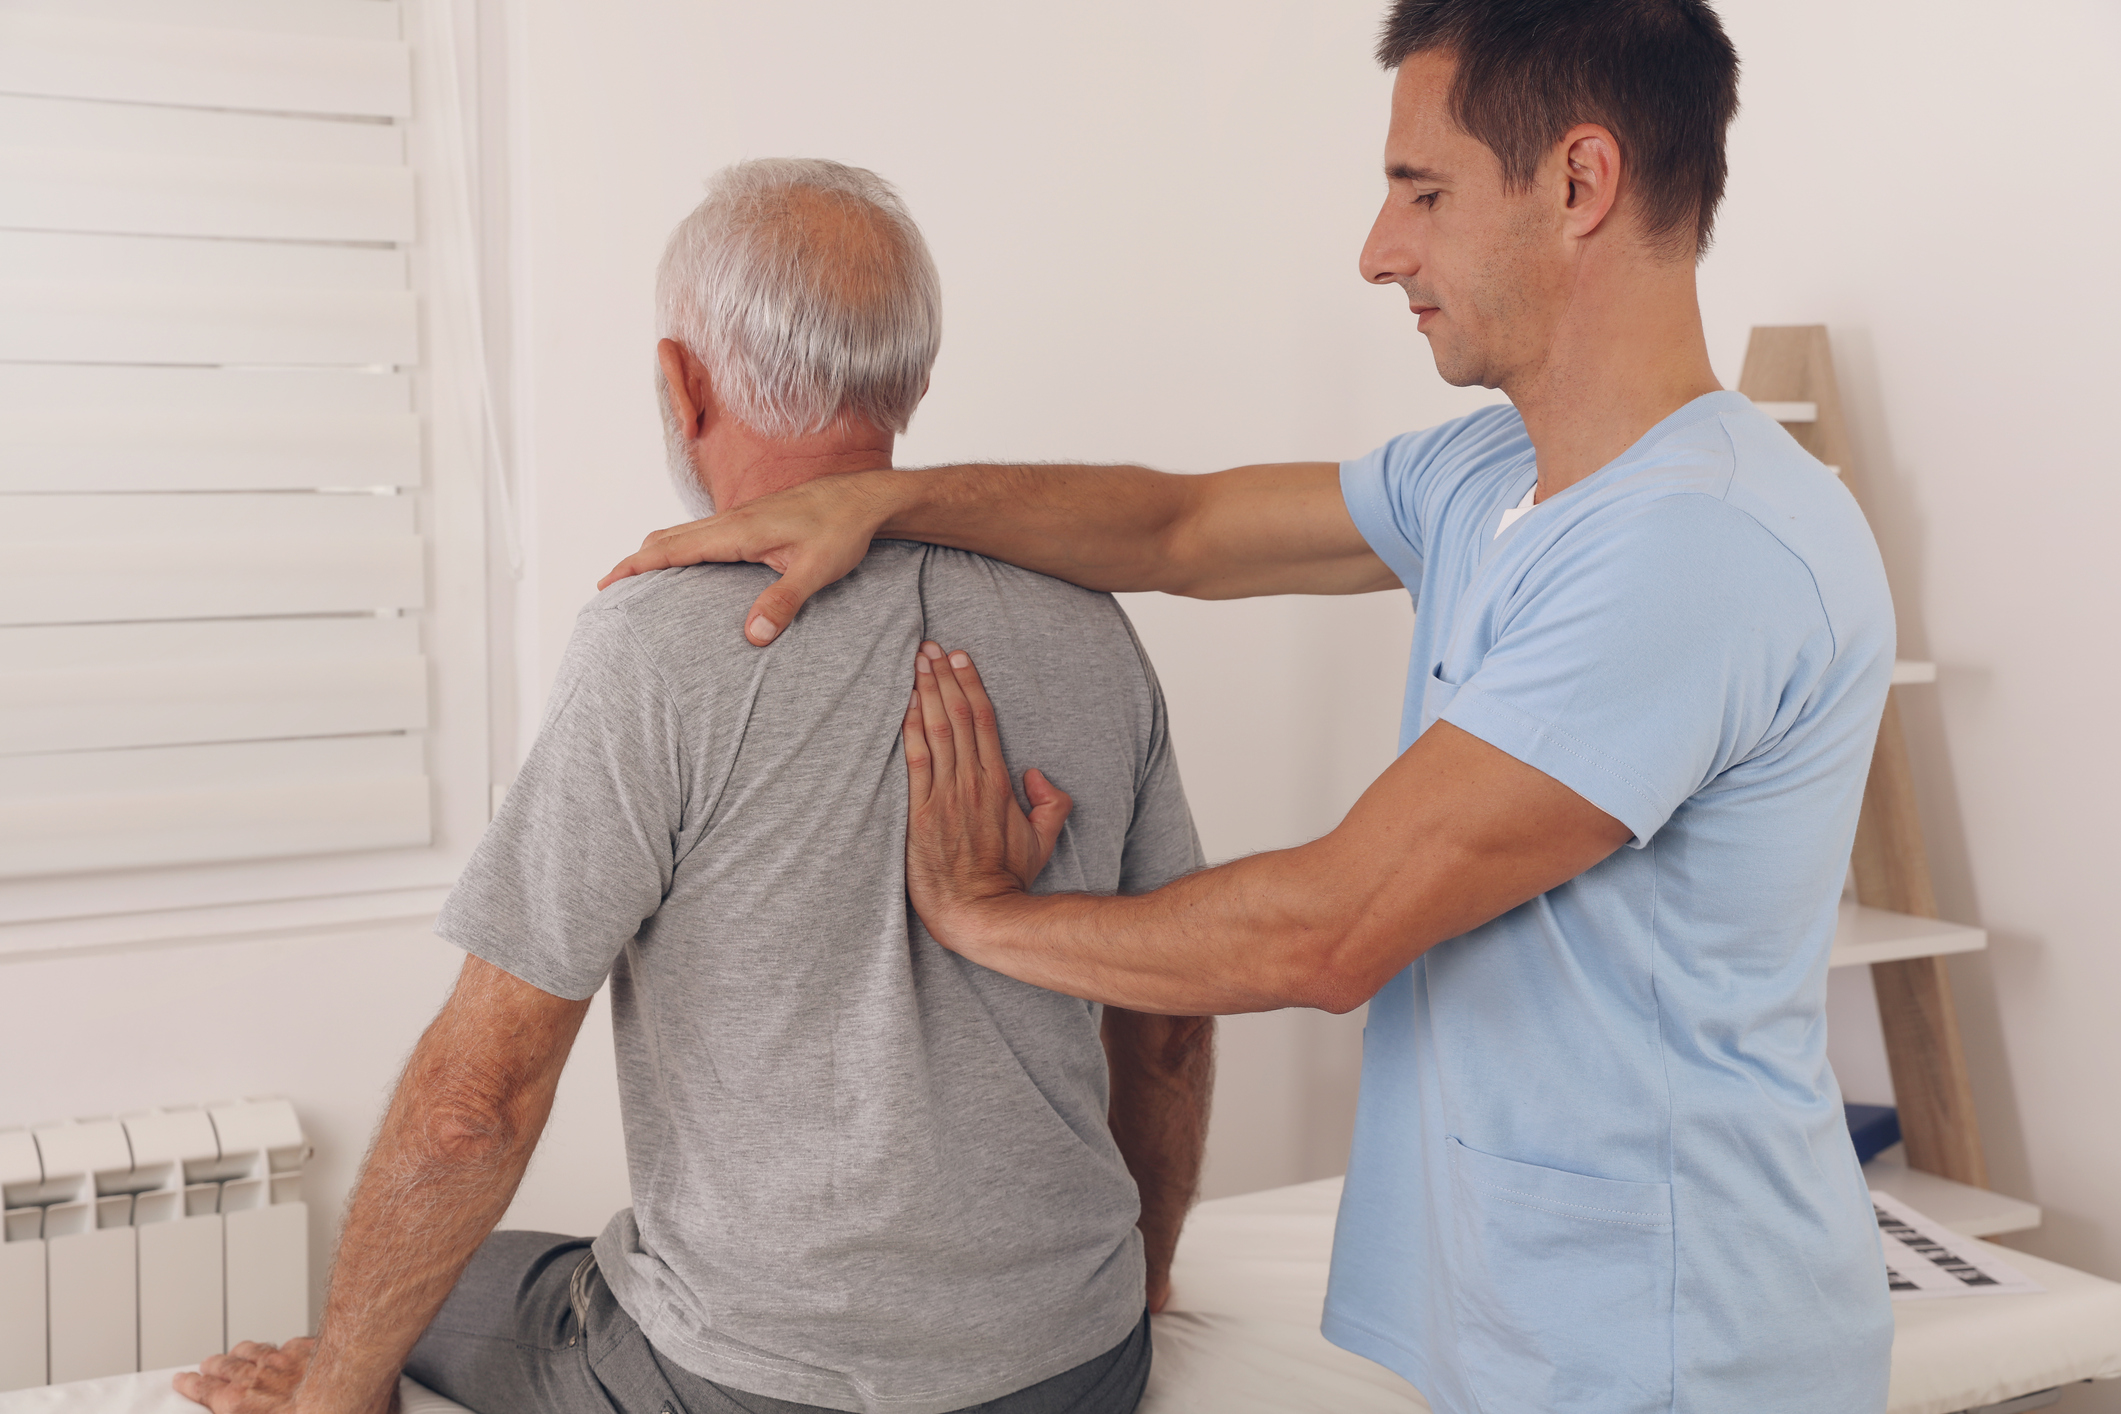 Visiting A Chiropractor For Neck Pain Here’s What You Need To Know